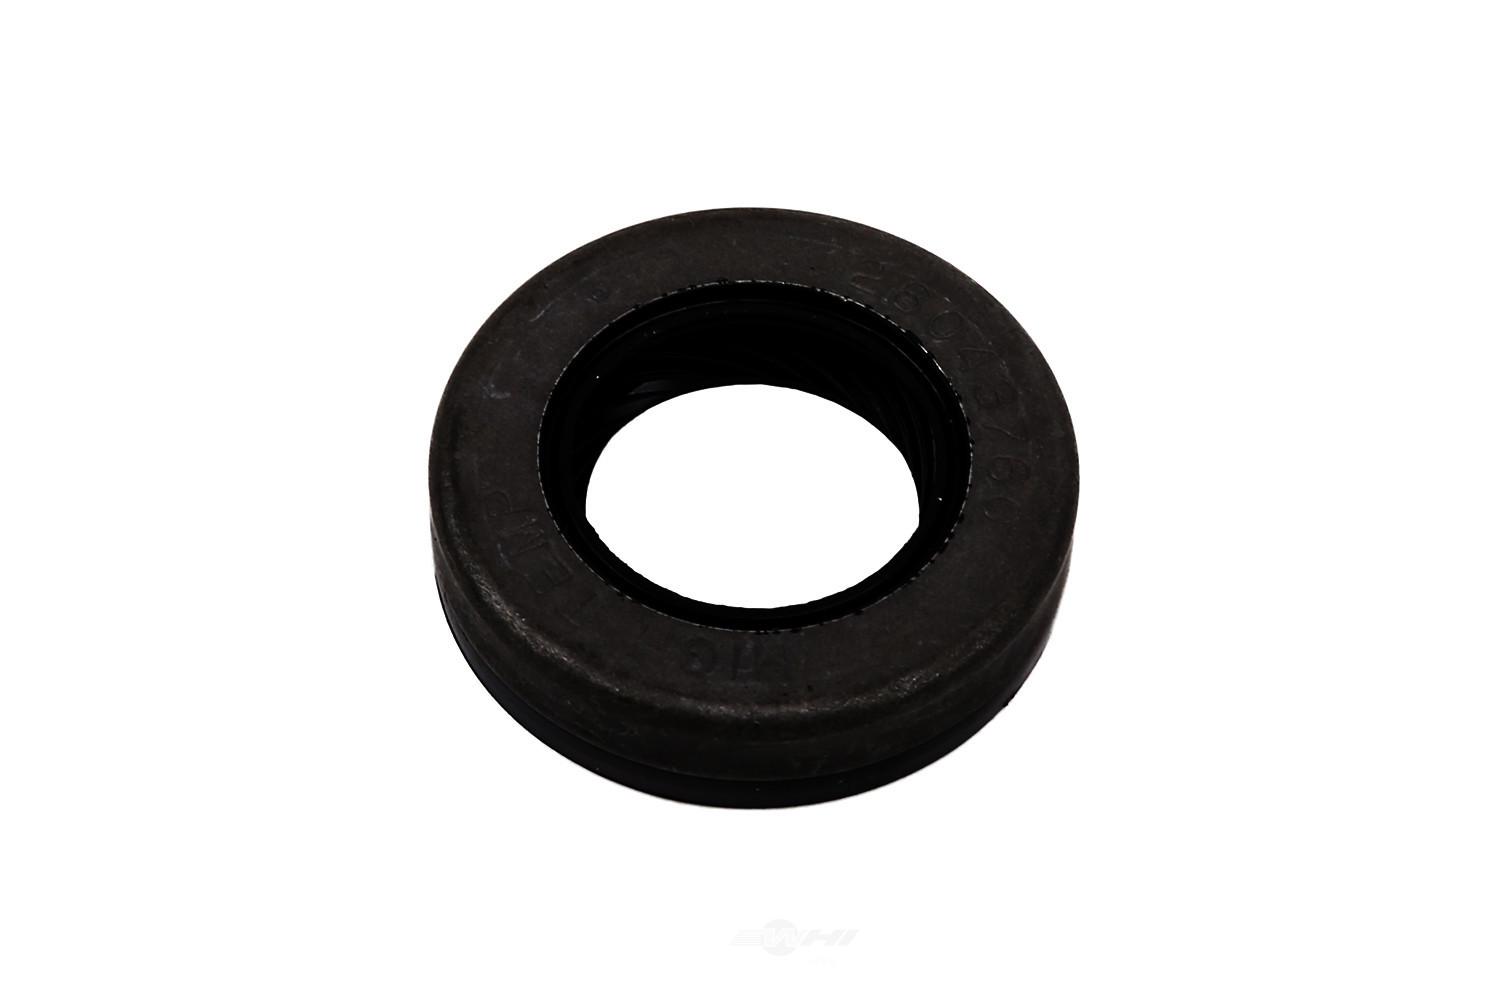 GM GENUINE PARTS - Power Steering Pump Drive Shaft Seal - GMP 15277770